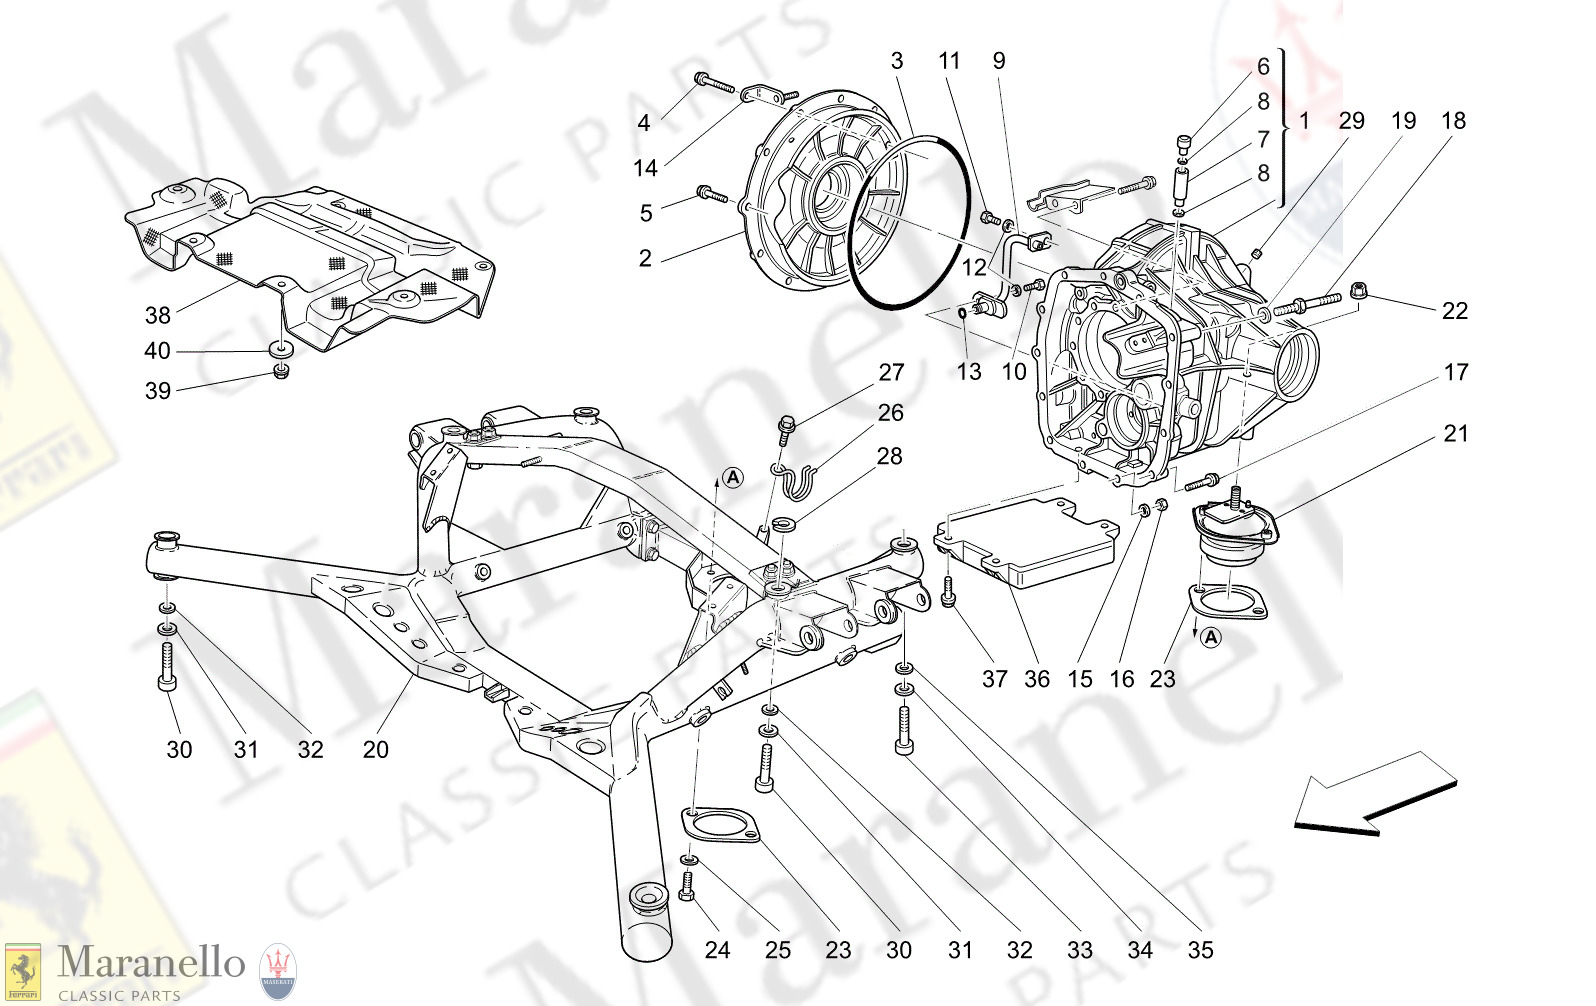 M3.22 - 11 - M322 - 11 Differential Box And Rear Underbody